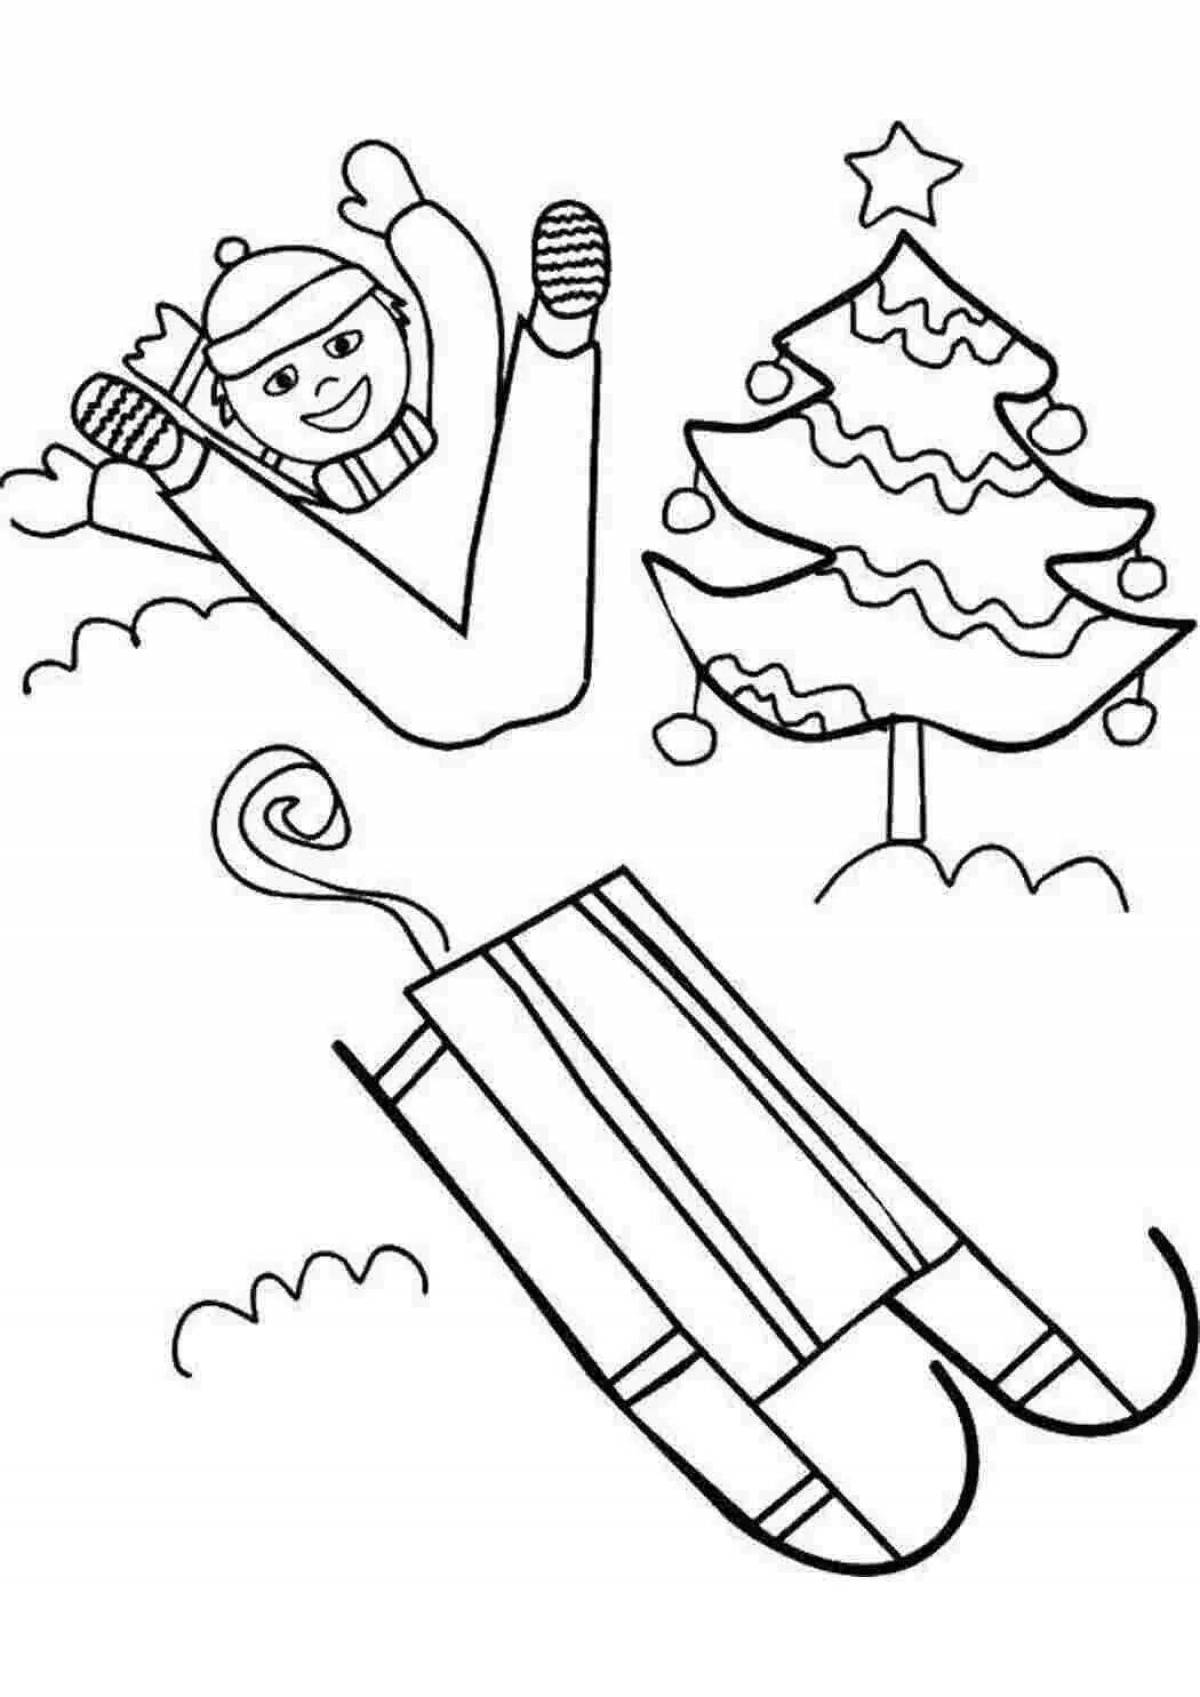 Exciting snow slide coloring page